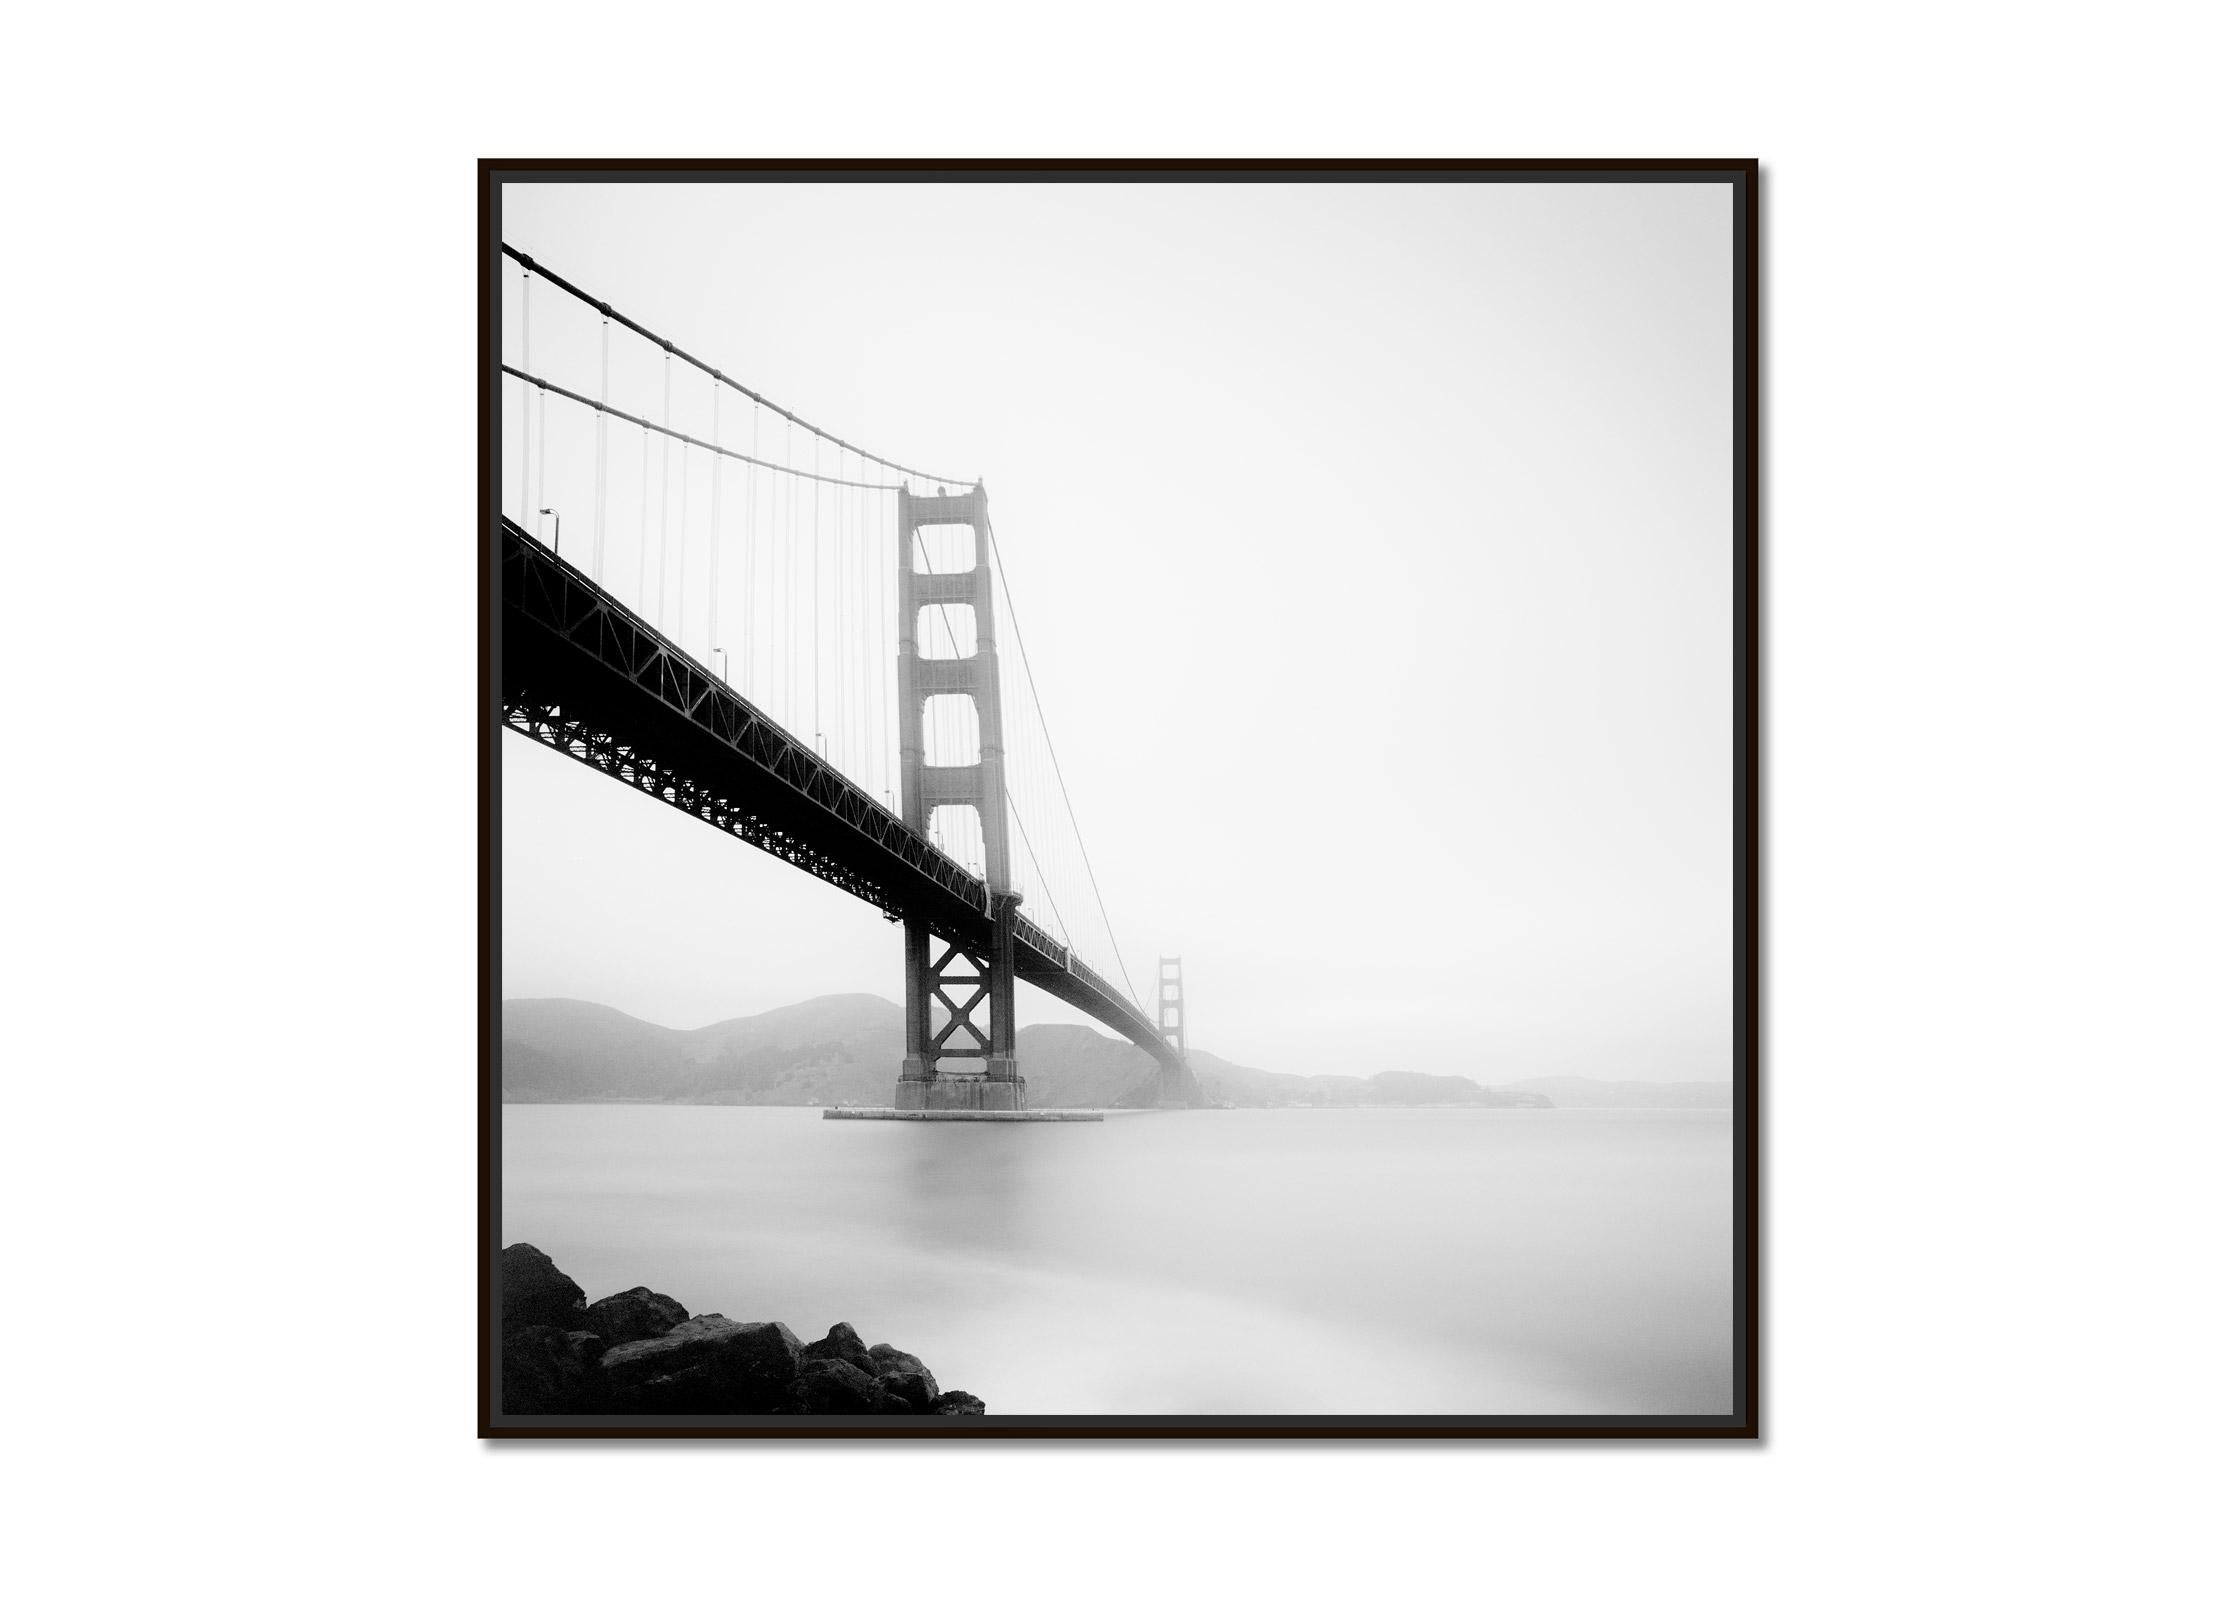 Golden Gate Bridge, foggy, San Francisco, black and white cityscape photography - Photograph by Gerald Berghammer